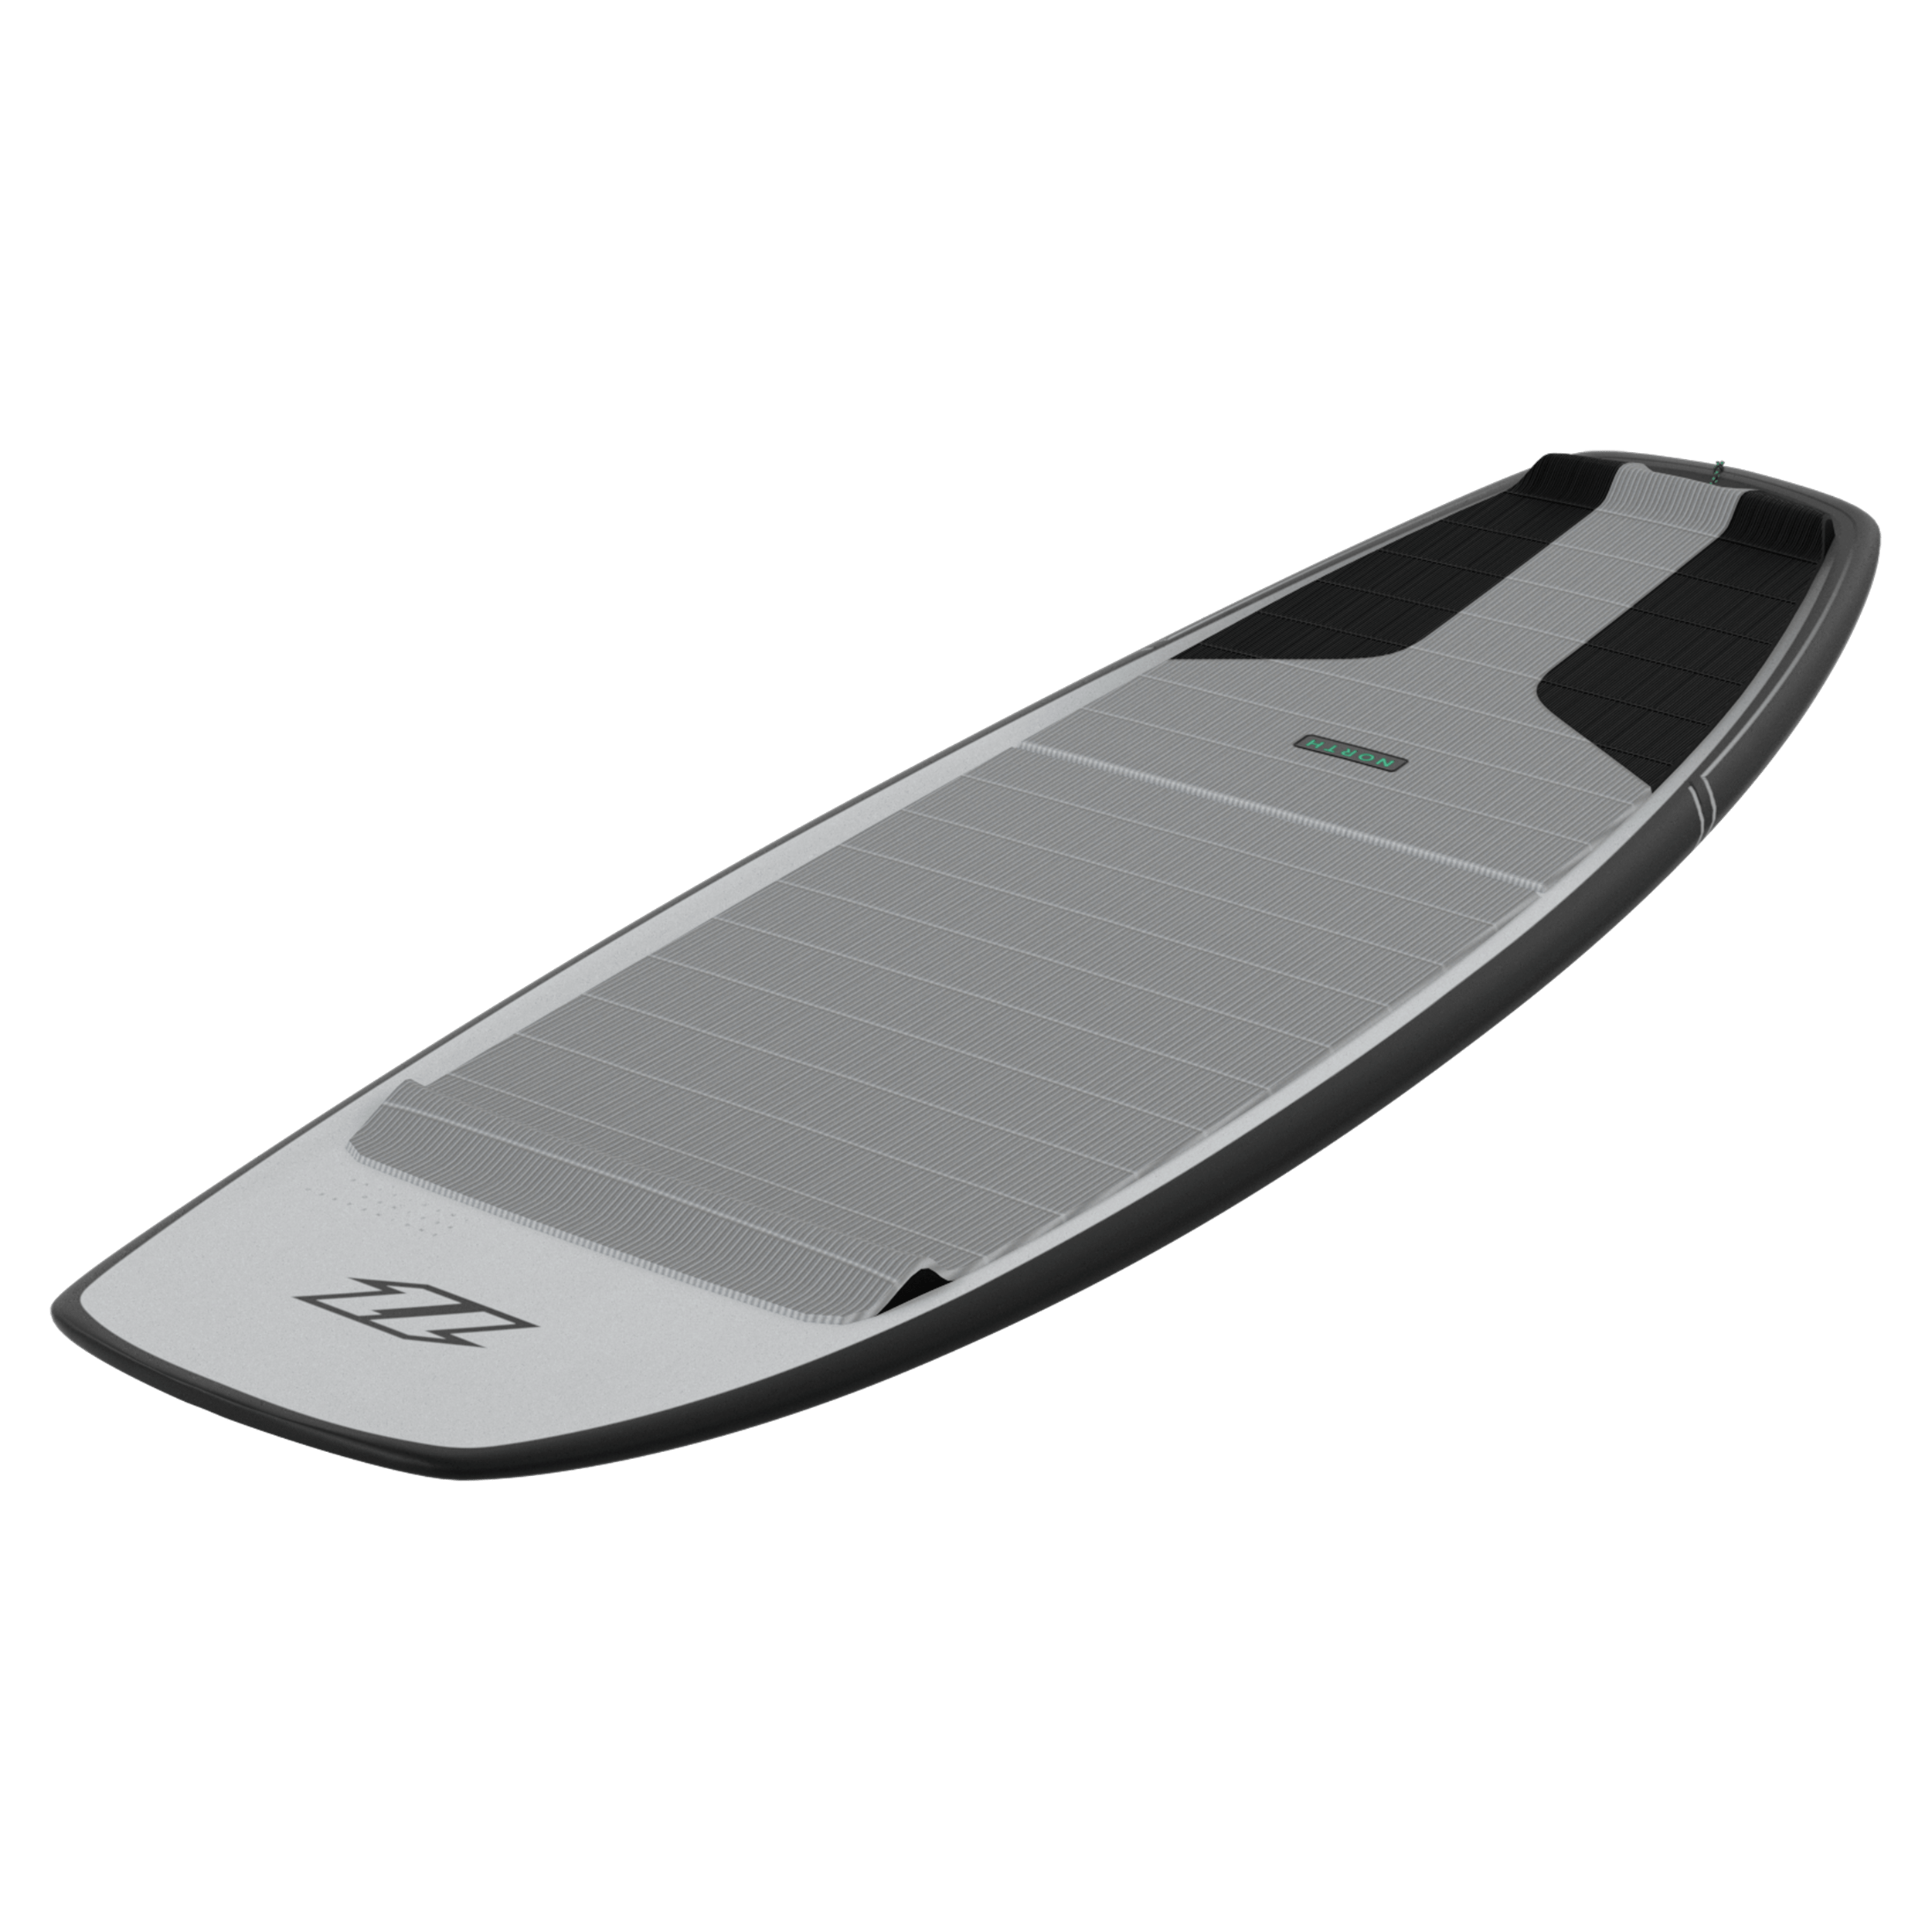 North Comp Surfboard